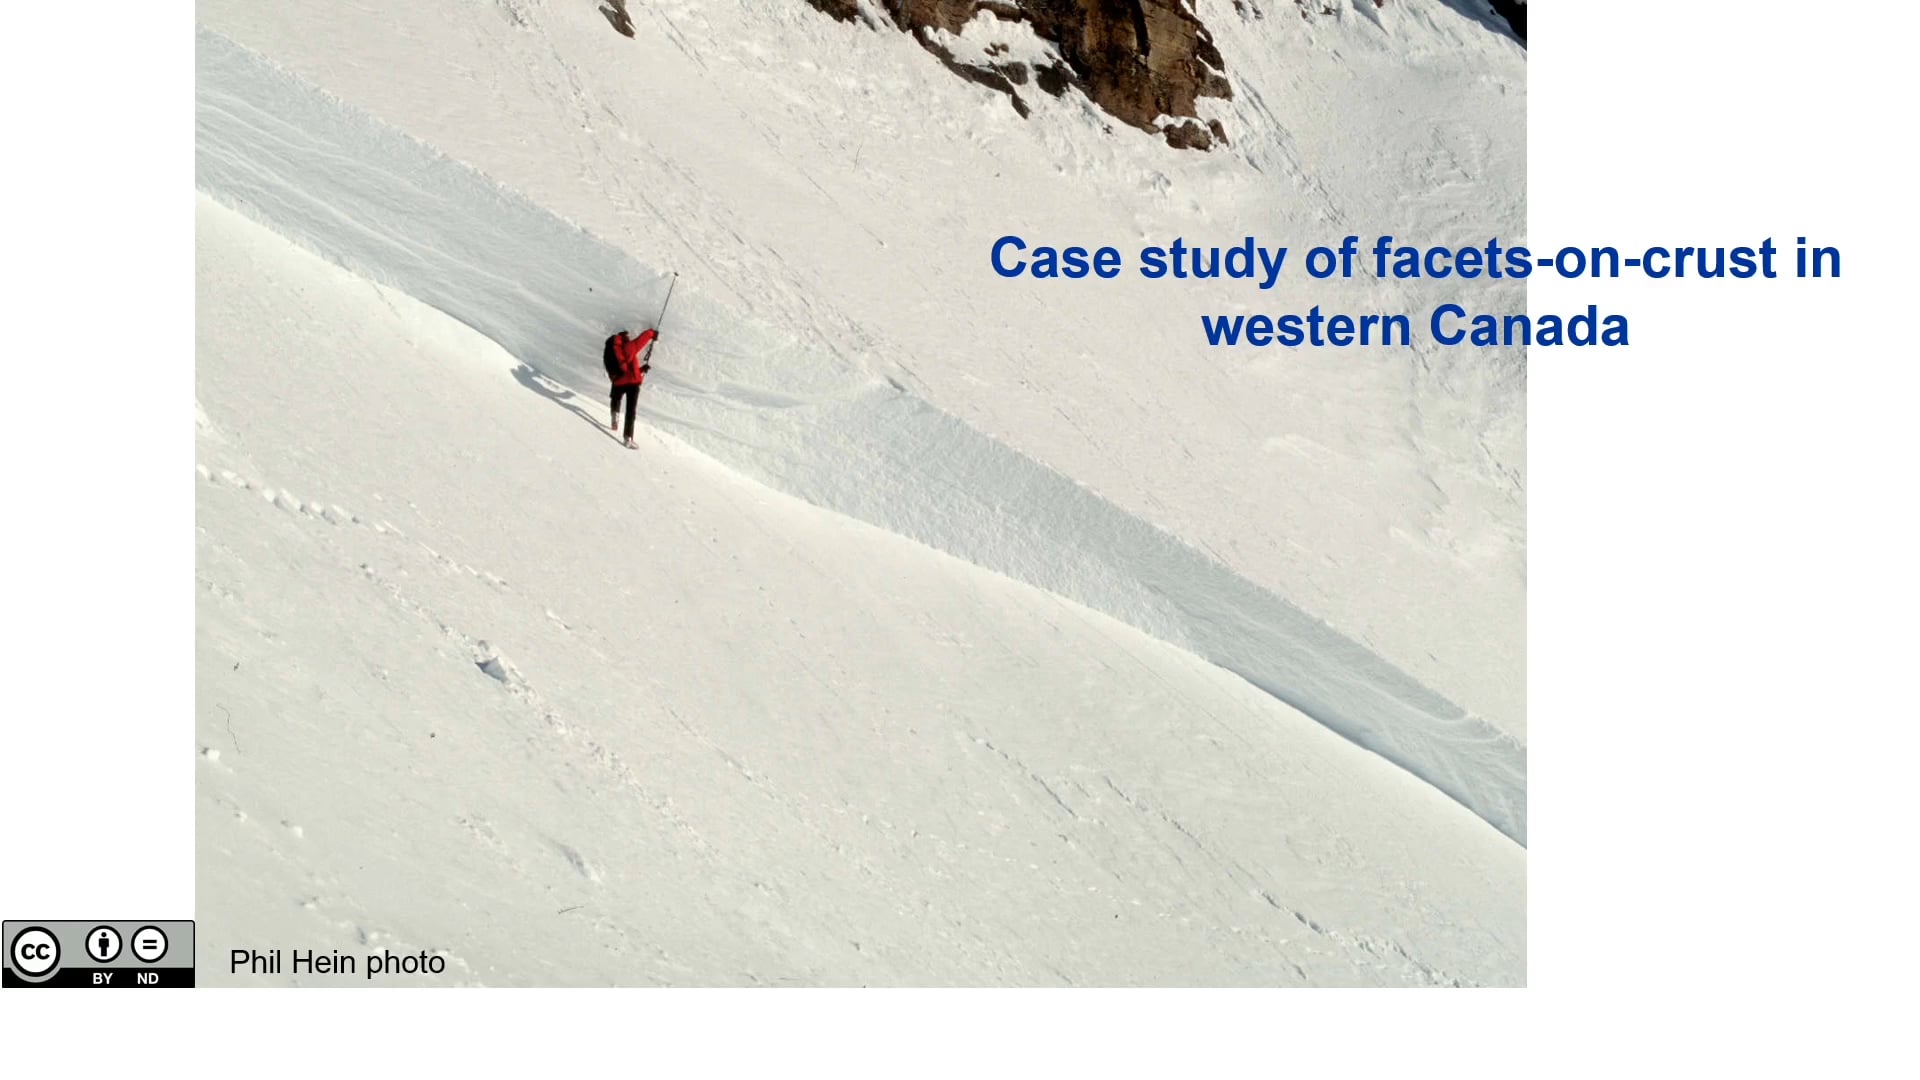 Case study of facets-on-crust in western Canada